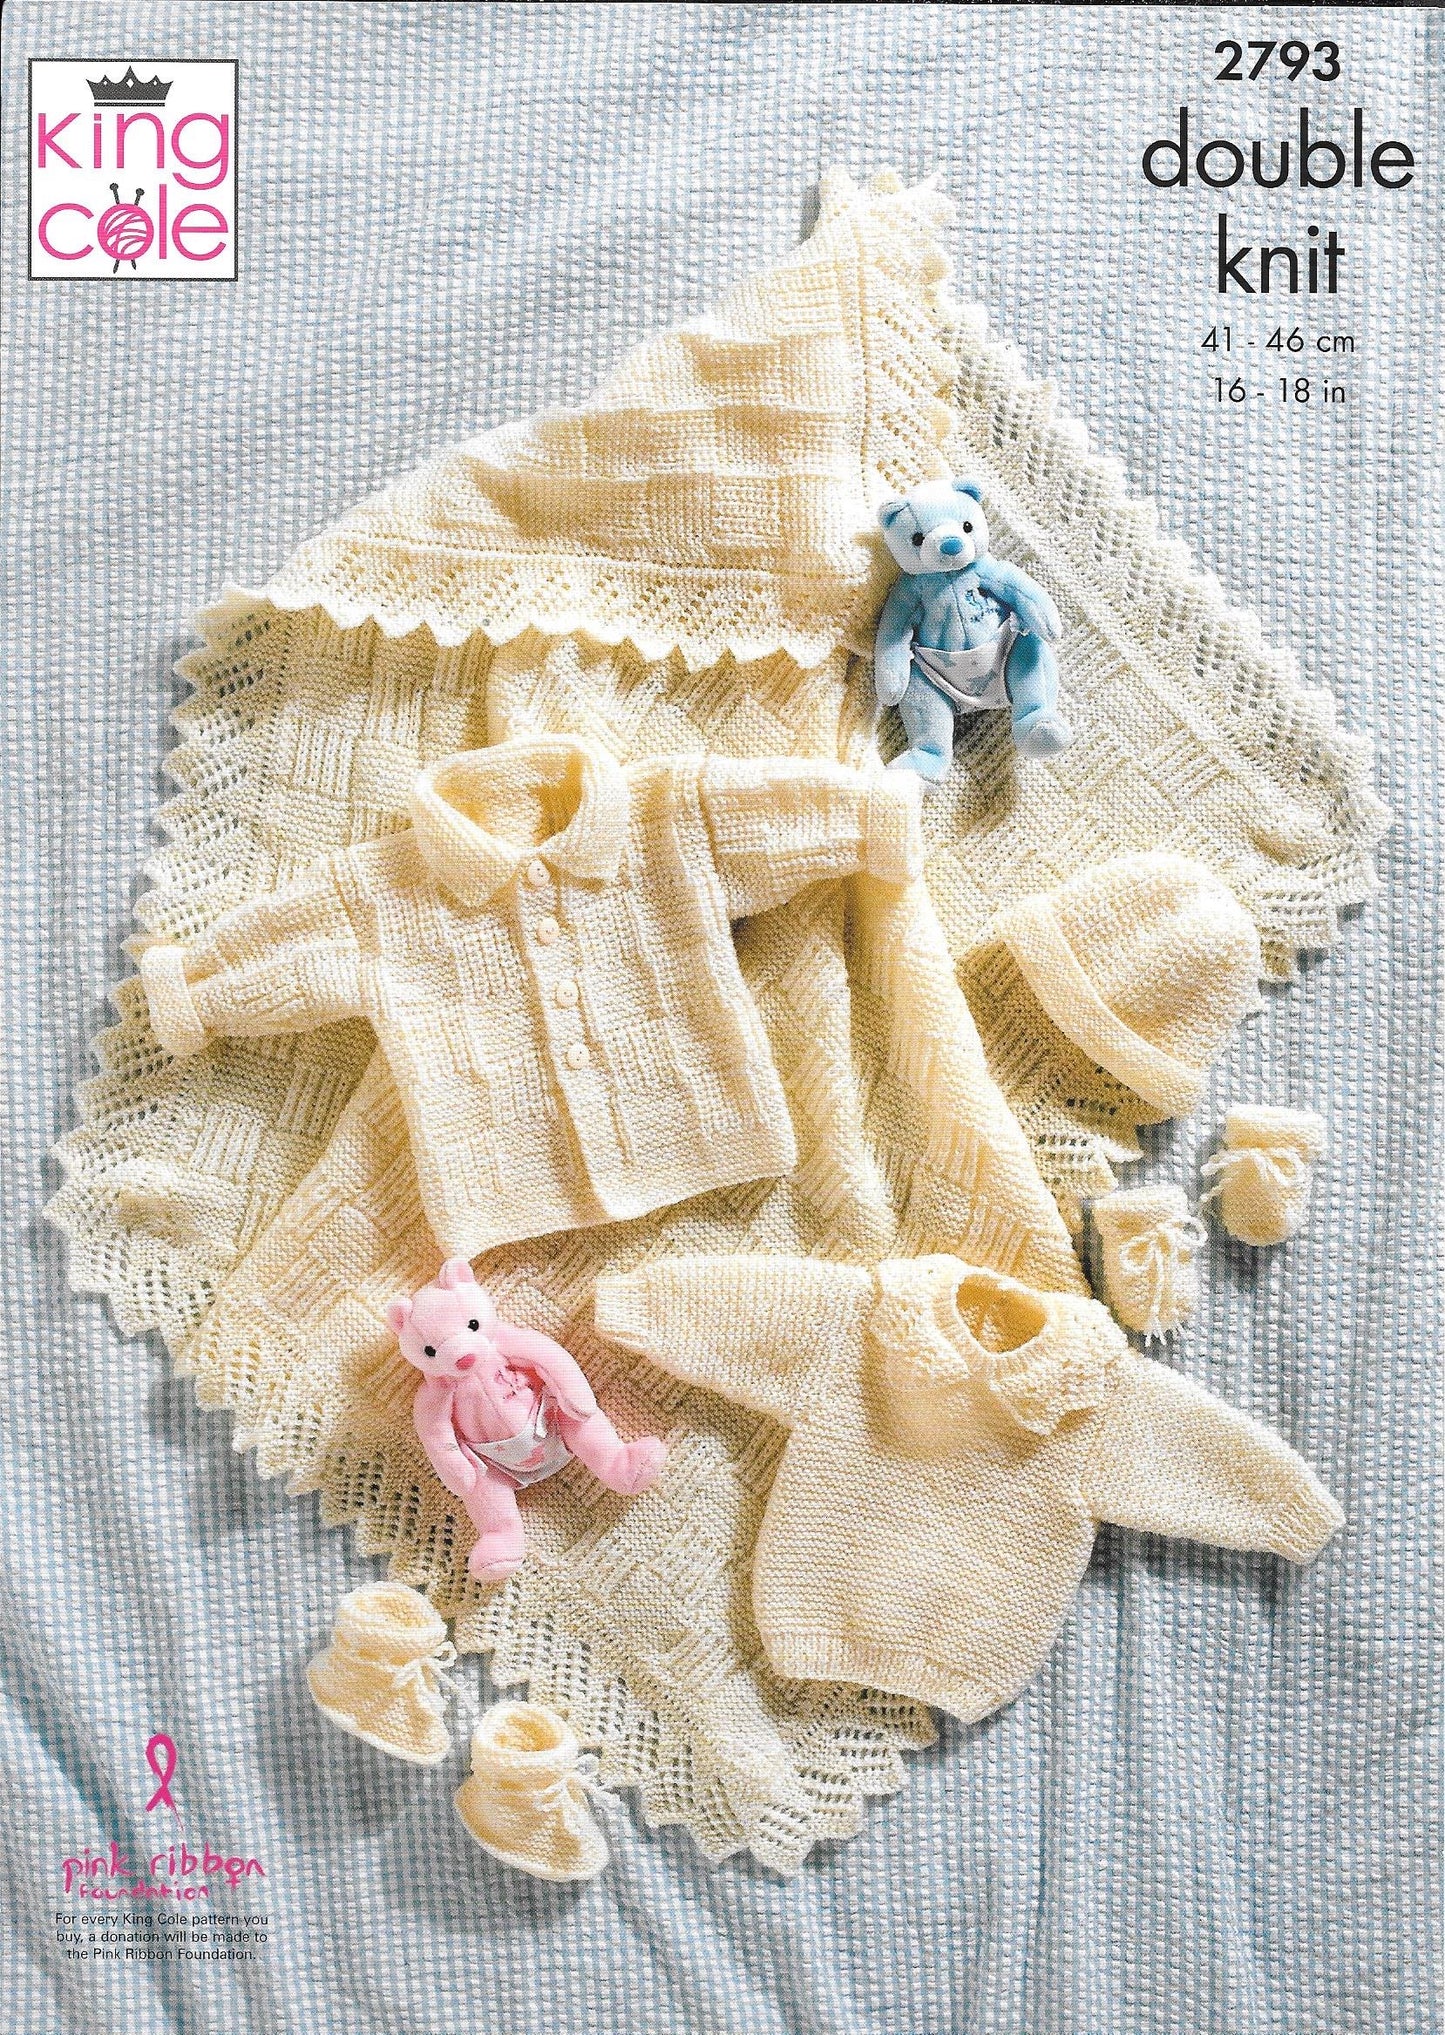 King Cole 2793 Dk Baby Sweater, Jacket,Hat, Shawl, Mitts and Bootees Knitting pattern